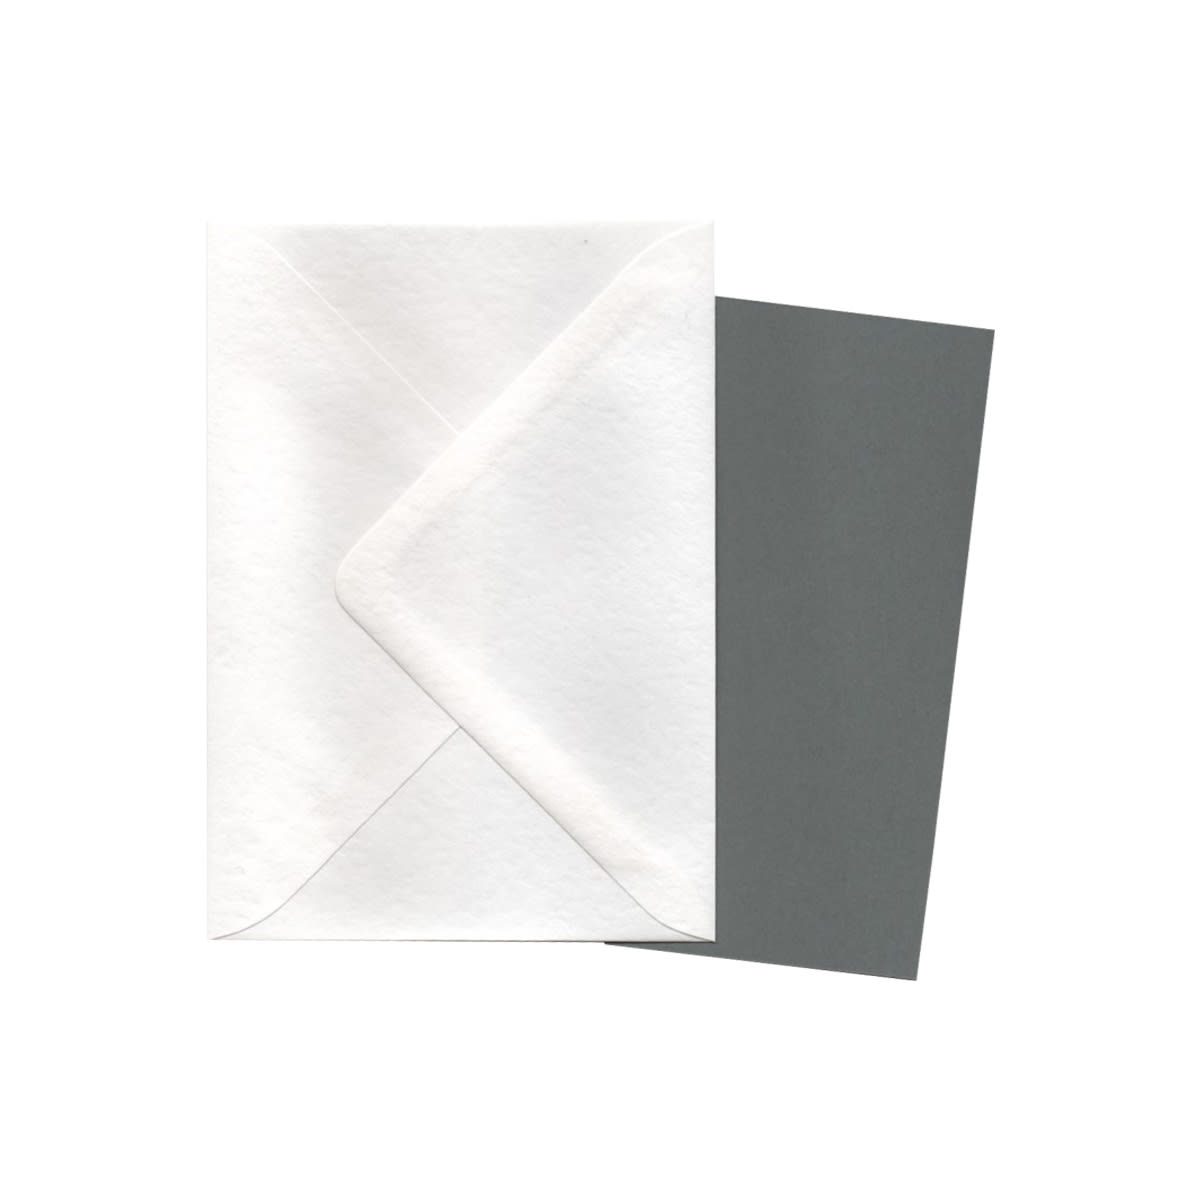 A6 Wagtail Grey Card Blanks & White Hammer Envelopes (Pack of 10)